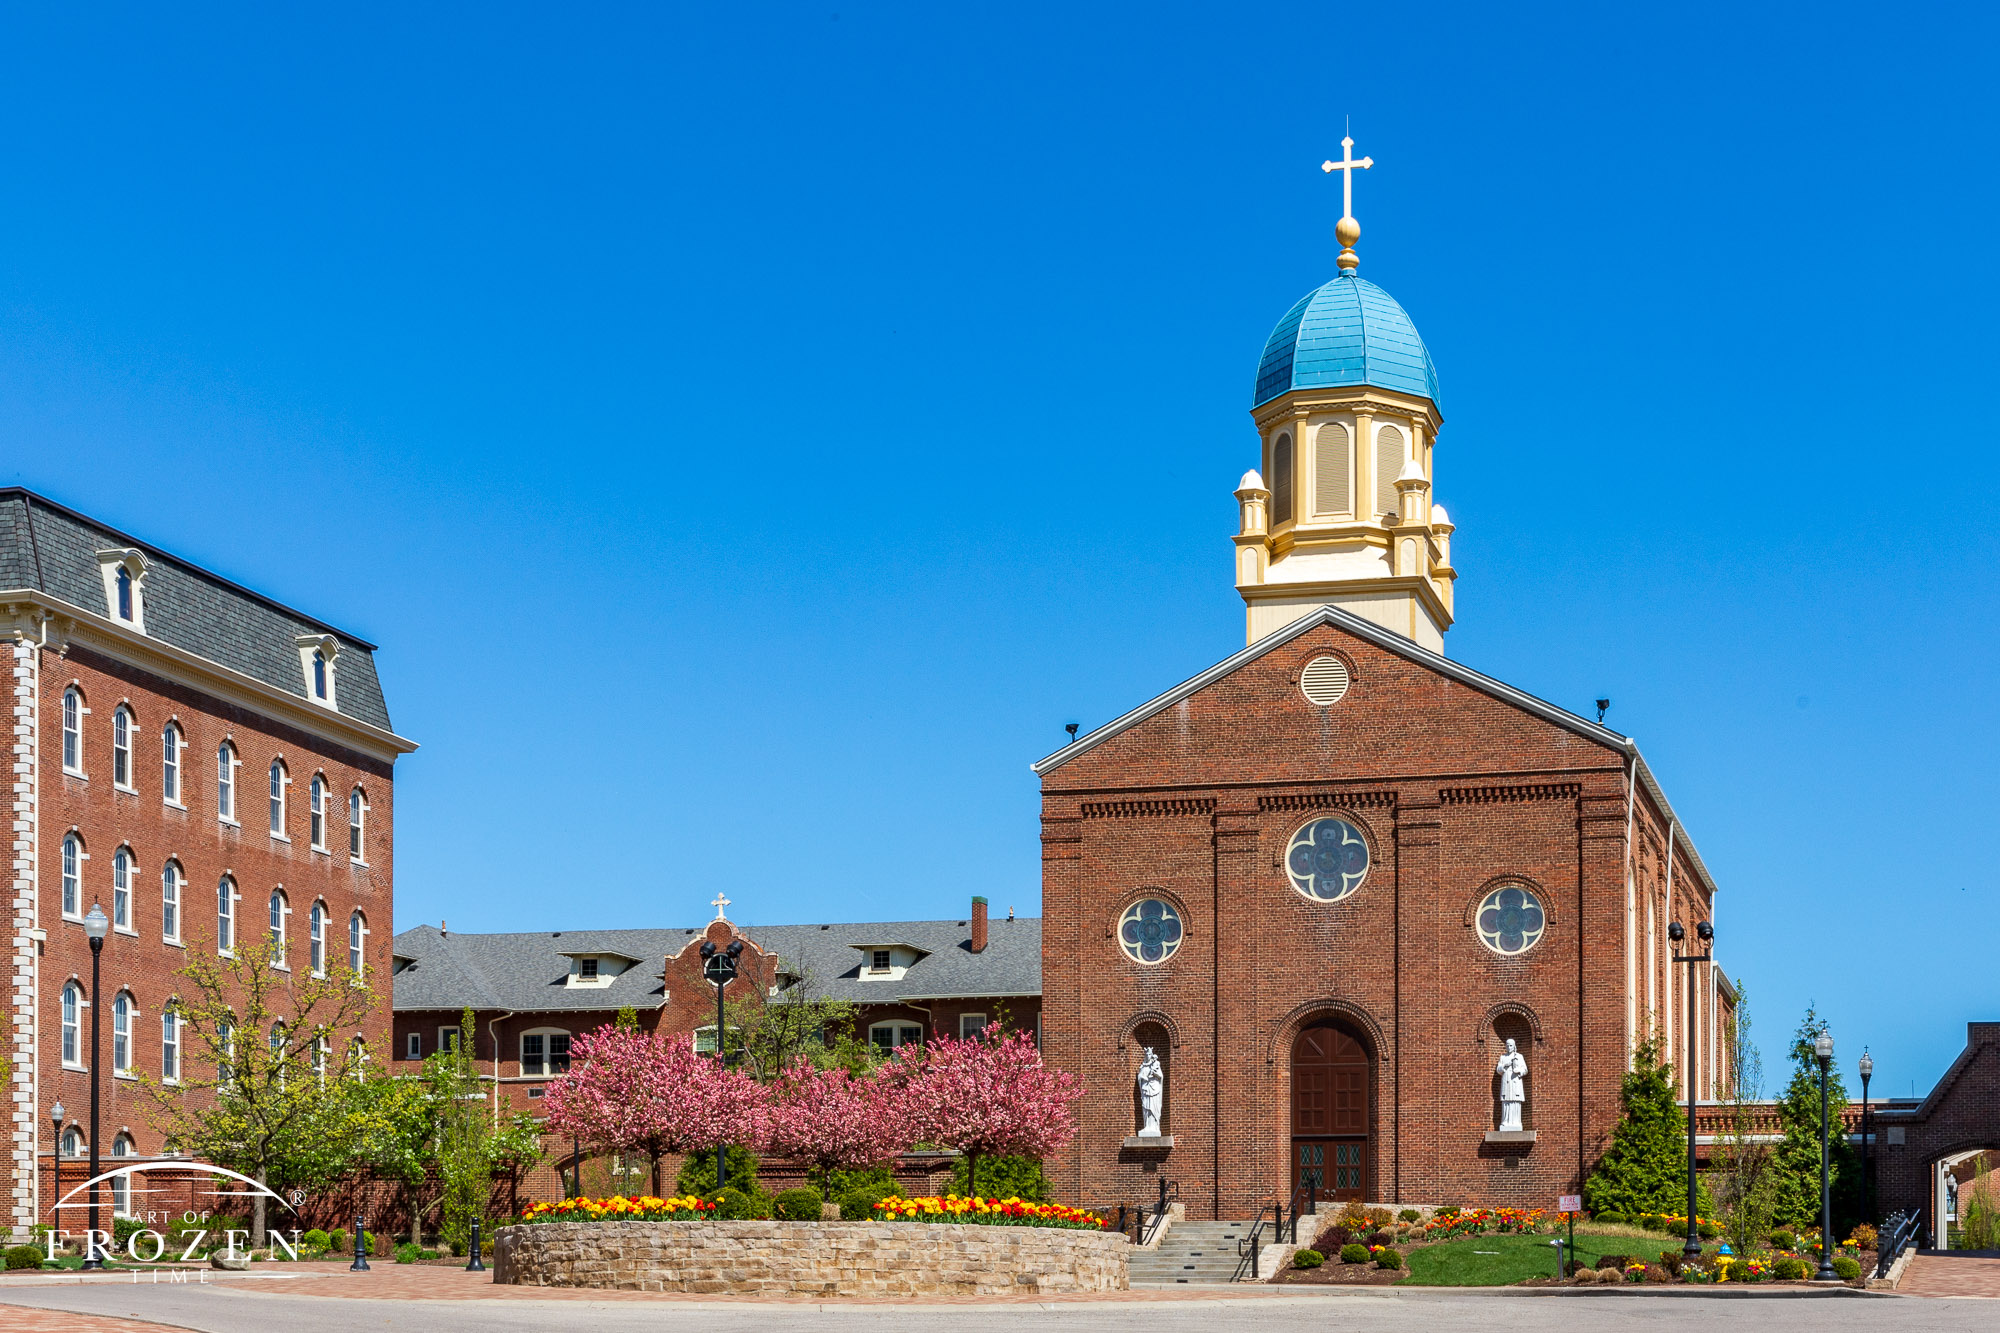 The University of Dayton's Chapel of the Immaculate Conception on a blooming spring day under blue skies